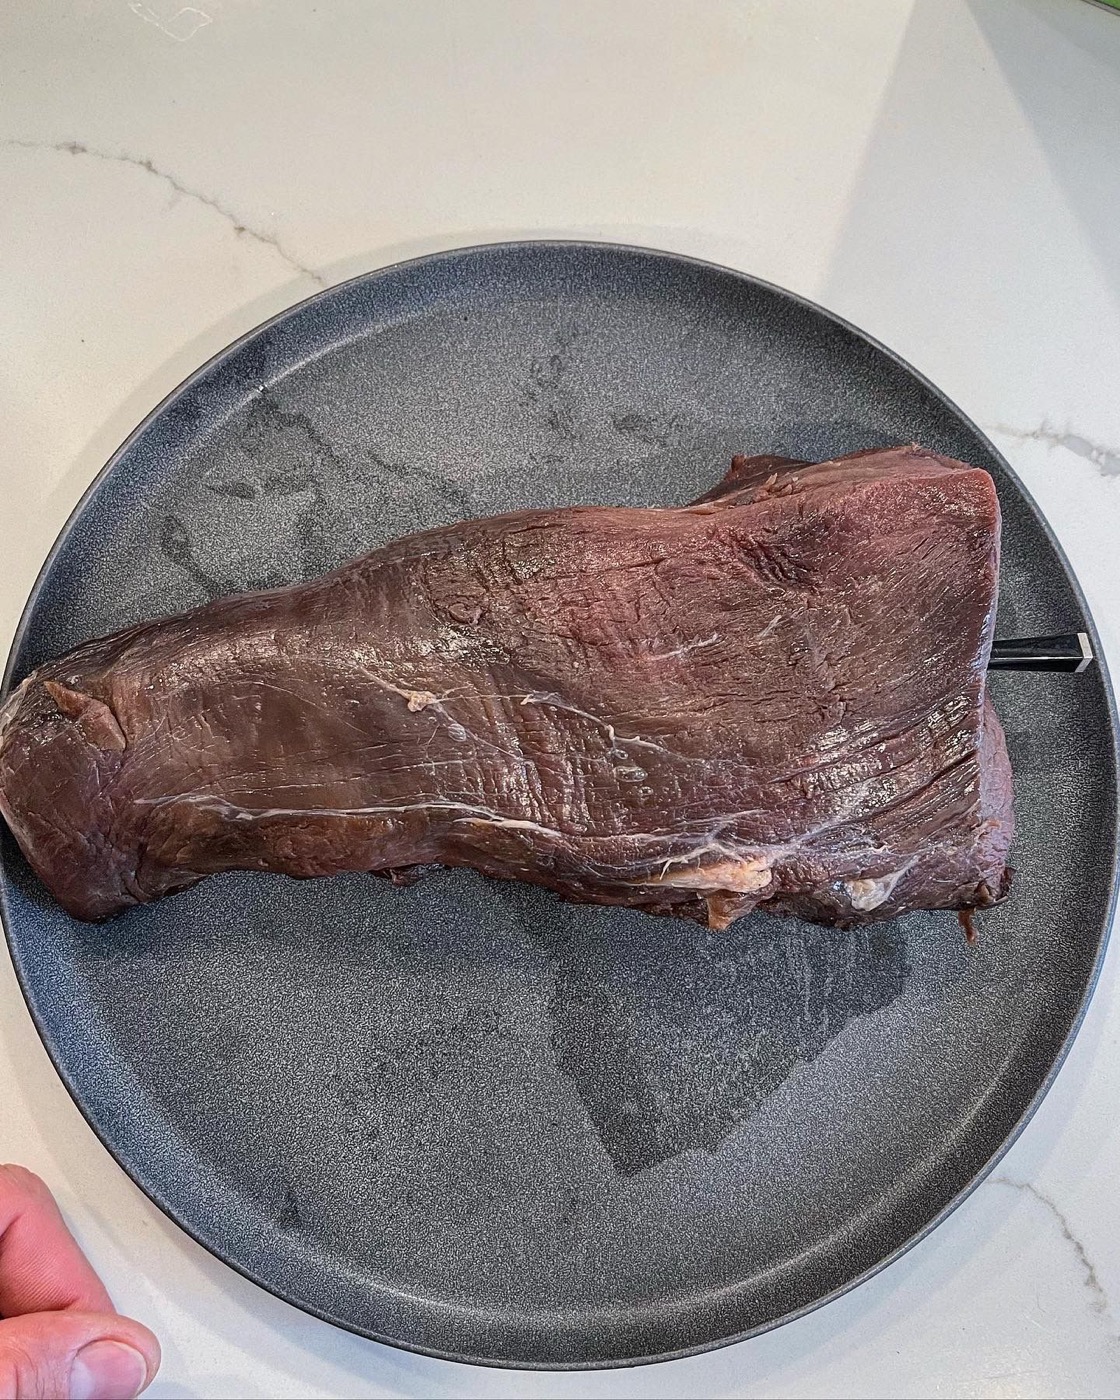 cooked moose meat